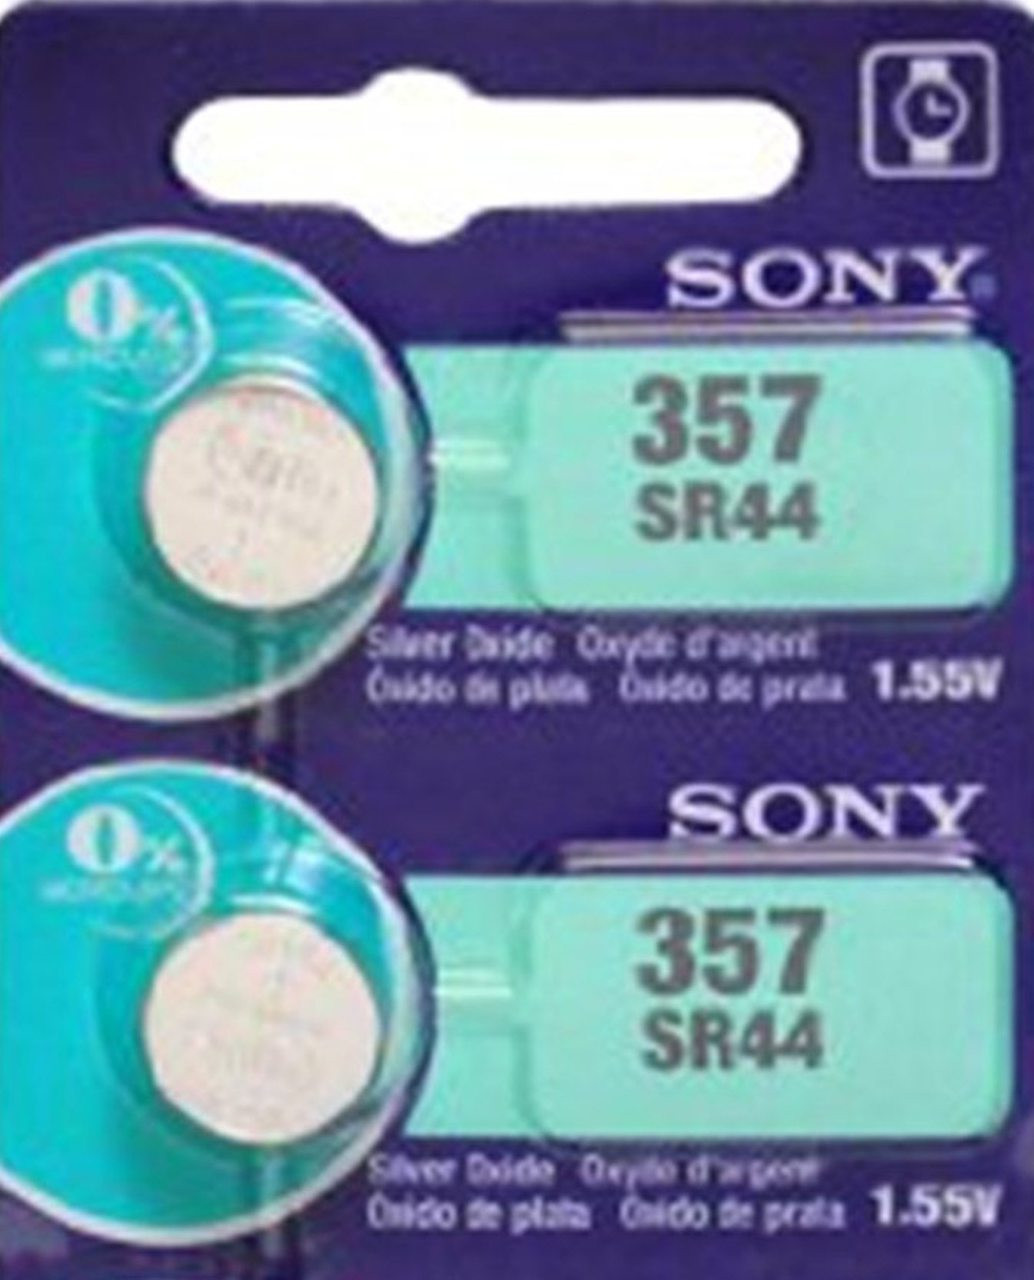 Sony Murata 357/303 - SR44 Silver Oxide Button Battery 1.55V - 2 Pack +  FREE SHIPPING! - Brooklyn Battery Works